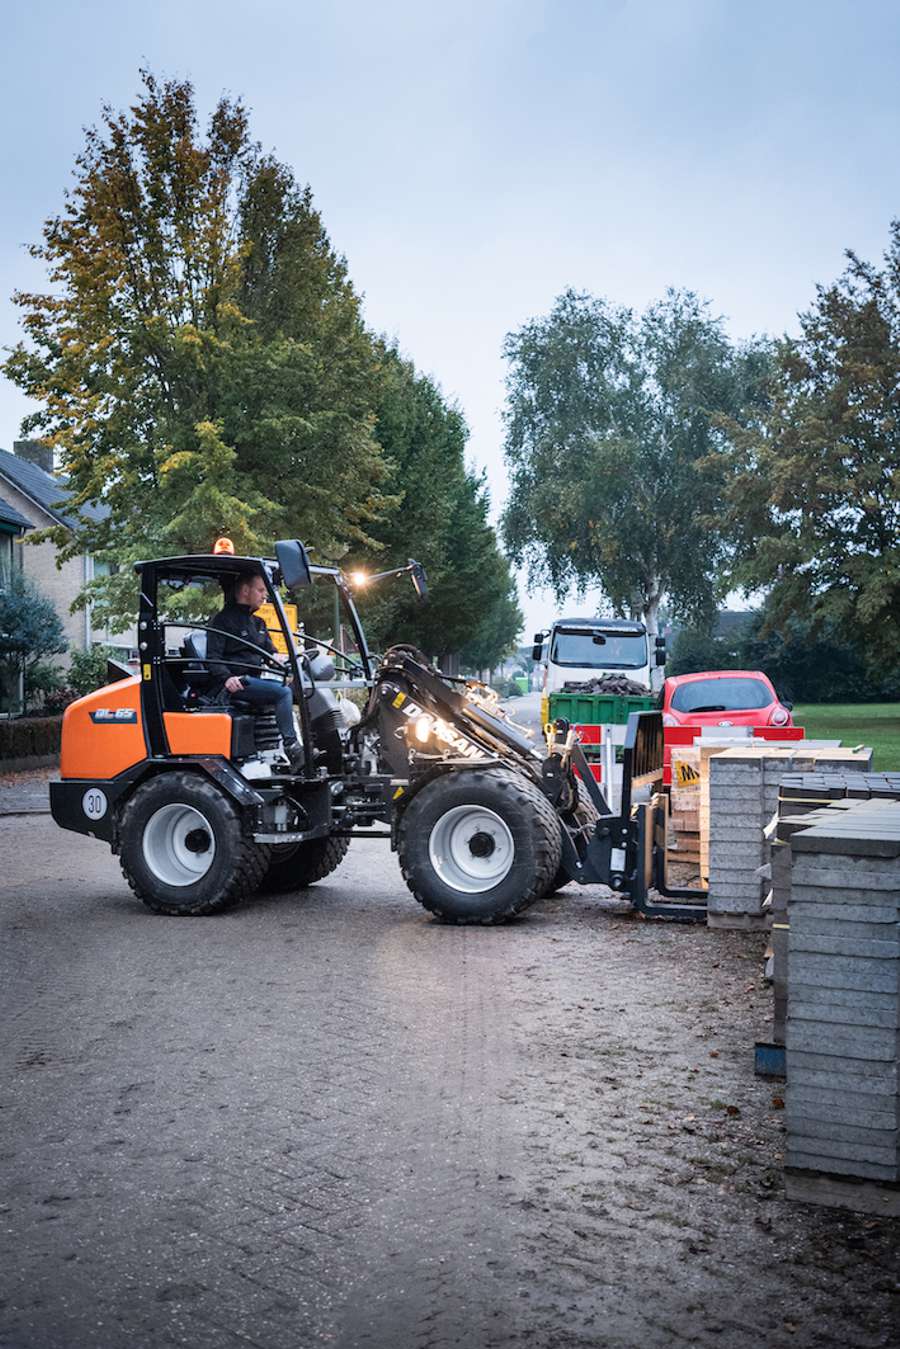 Doosan announces specifications for their five new Compact Wheel Loaders